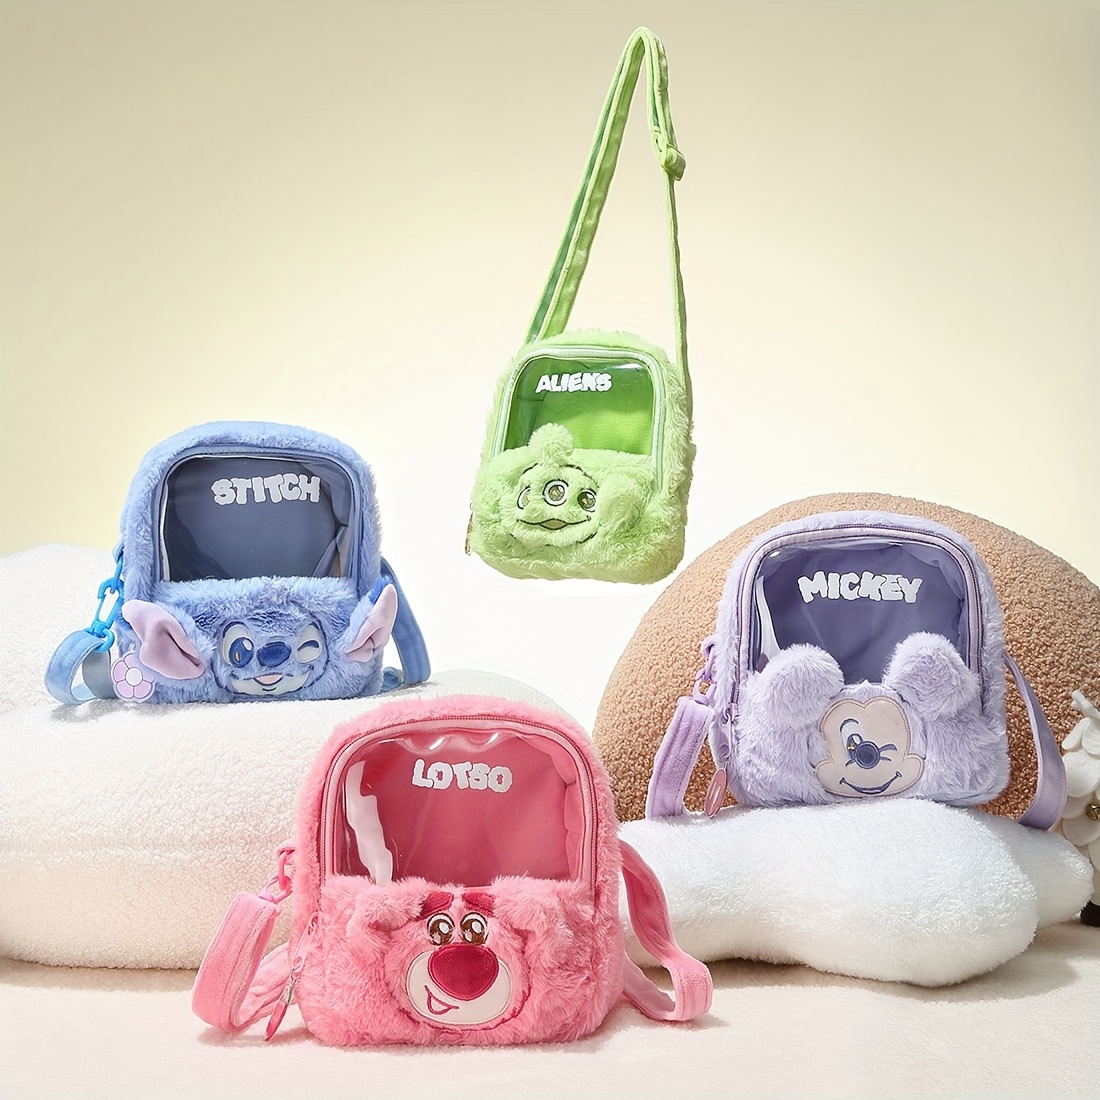 1pc * Shaggy Season Collection Straddle Bag For Stores (Mickey, Lotso, Alien, Stitch)